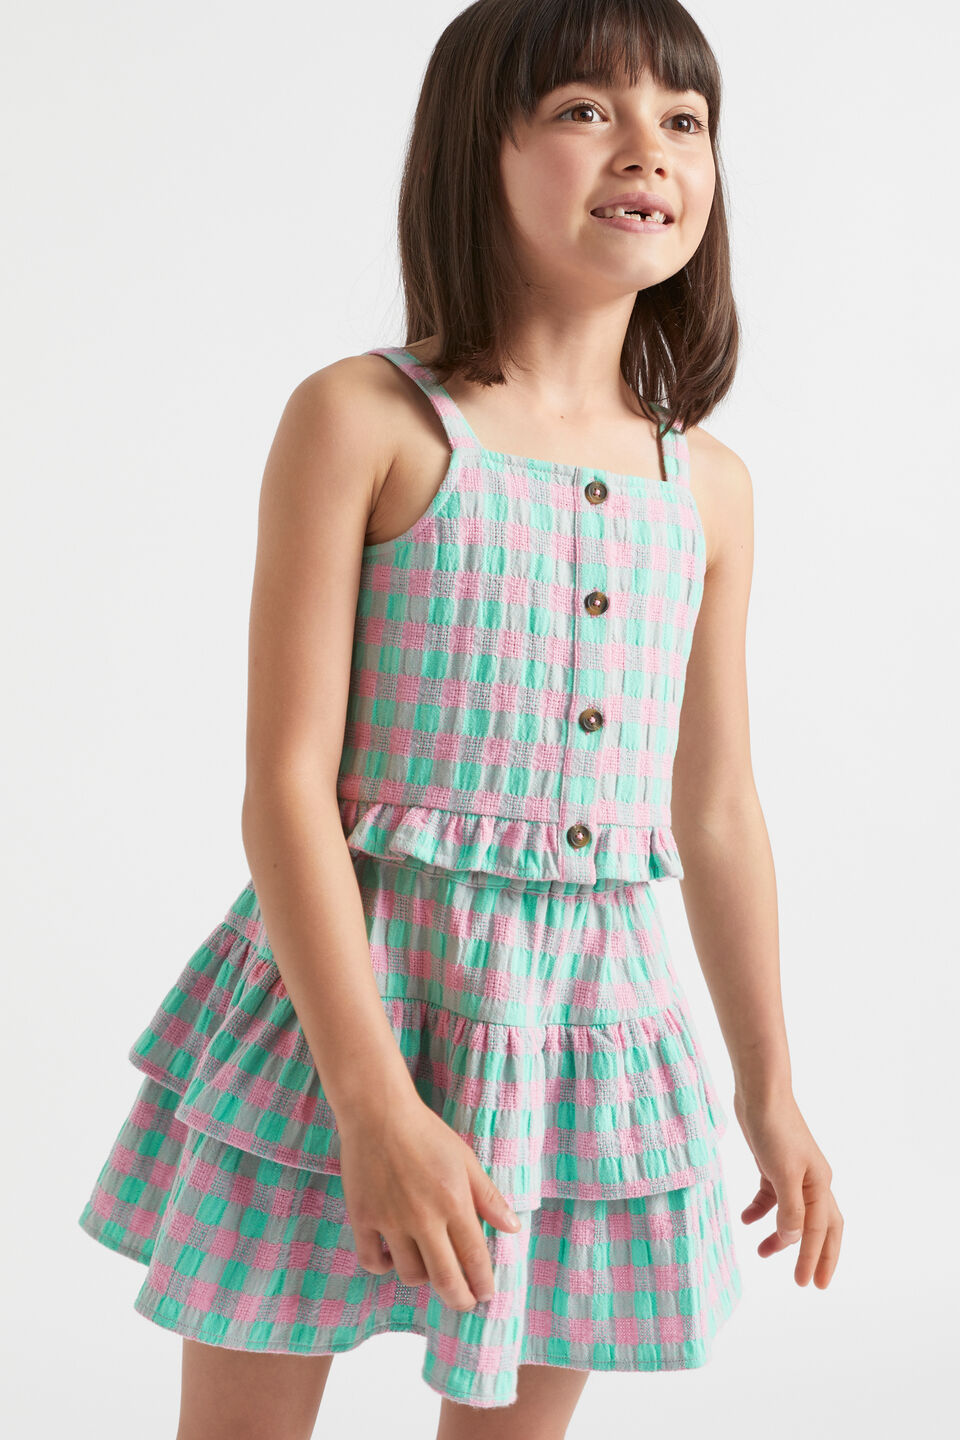 Gingham Cami  Candy Pink